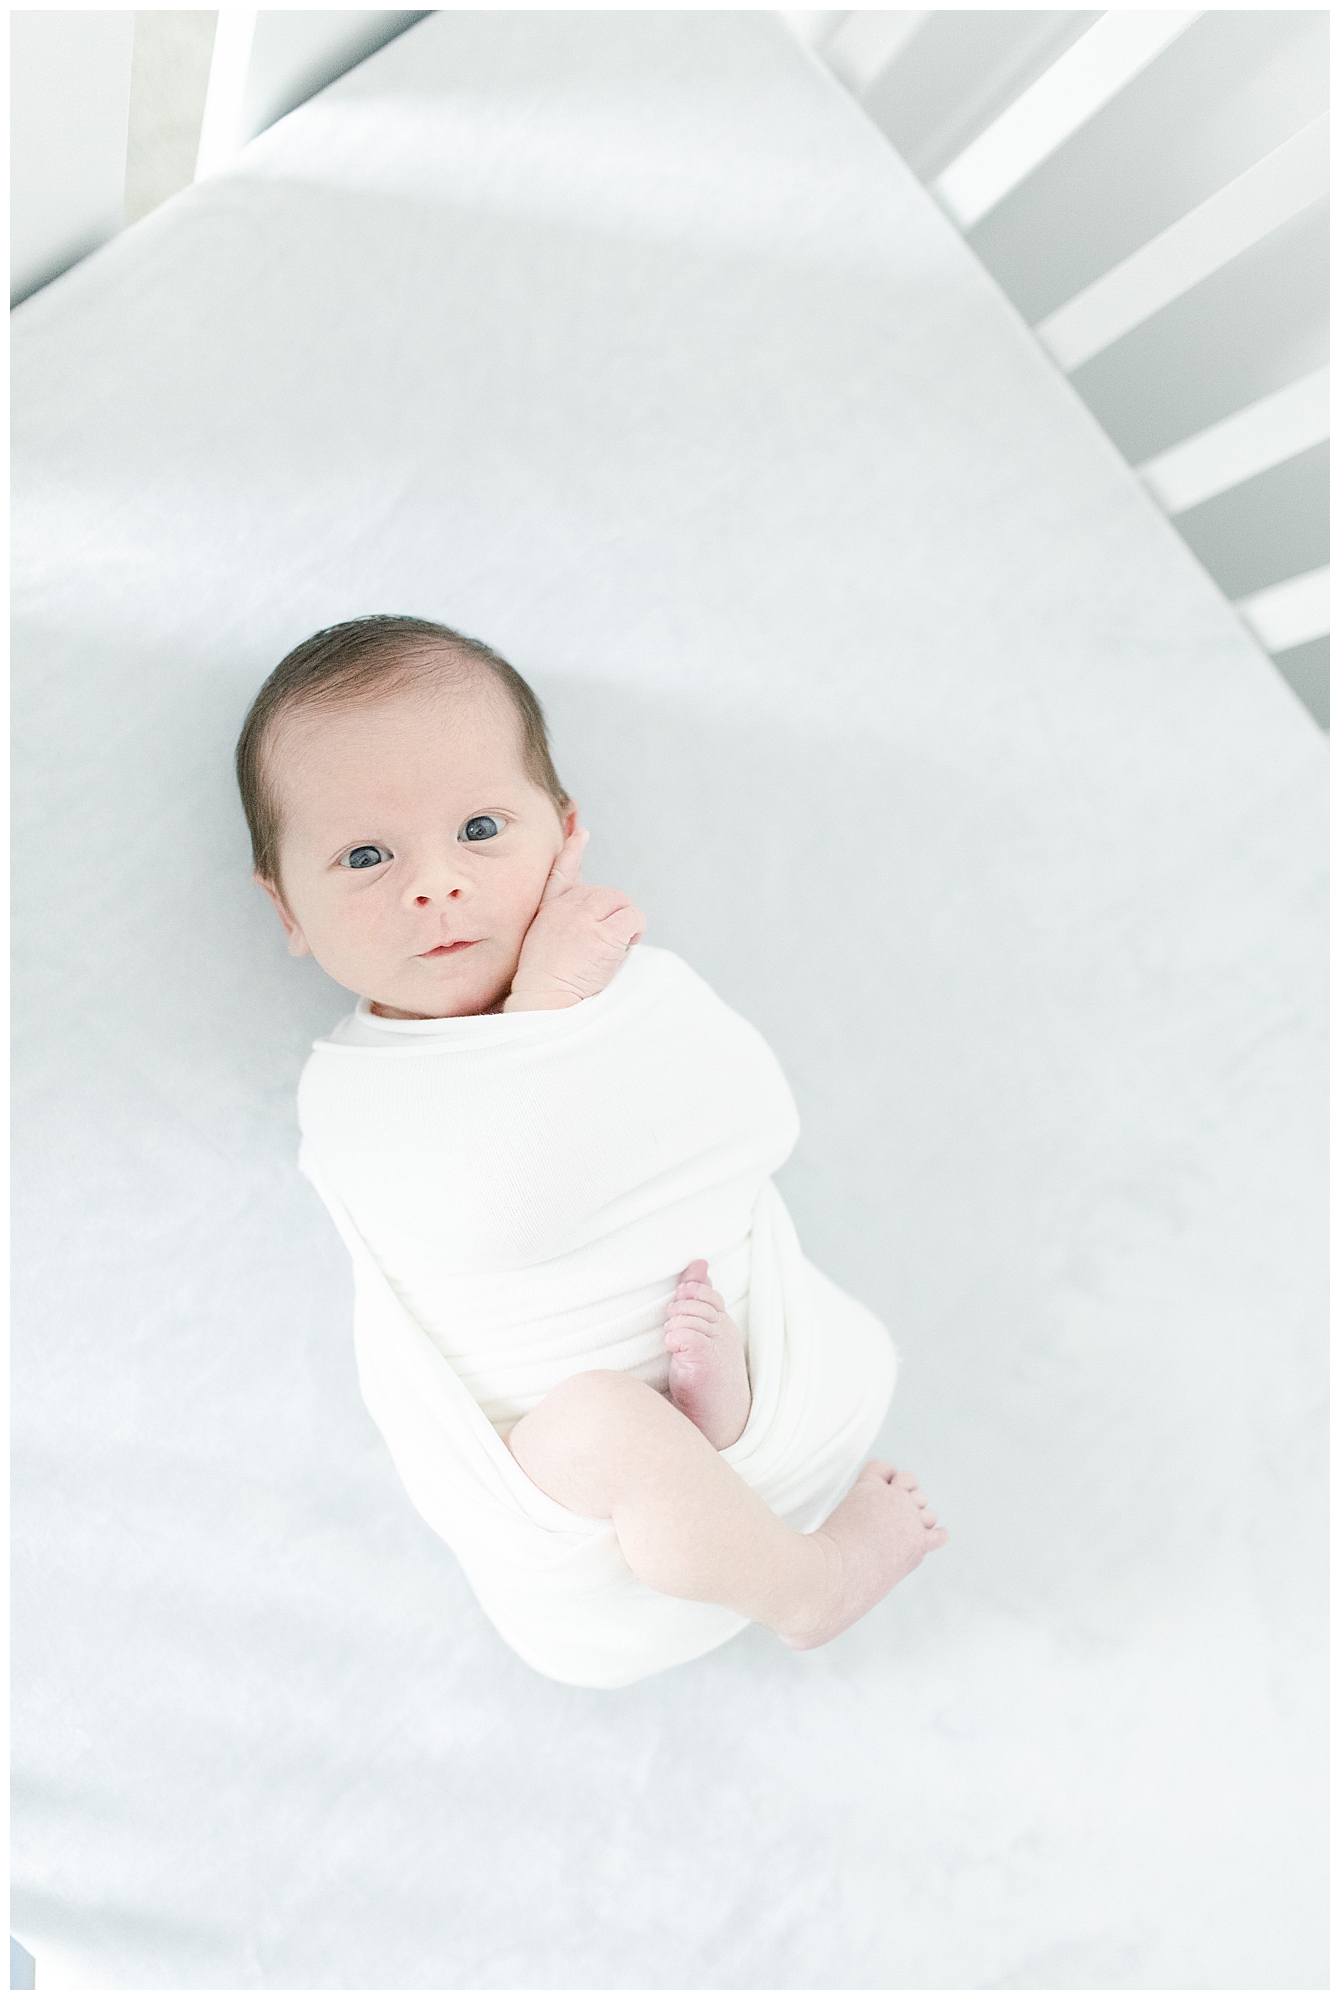 Alert newborn photographed during in home newborn session. Photo by Little Sunshine Photography.